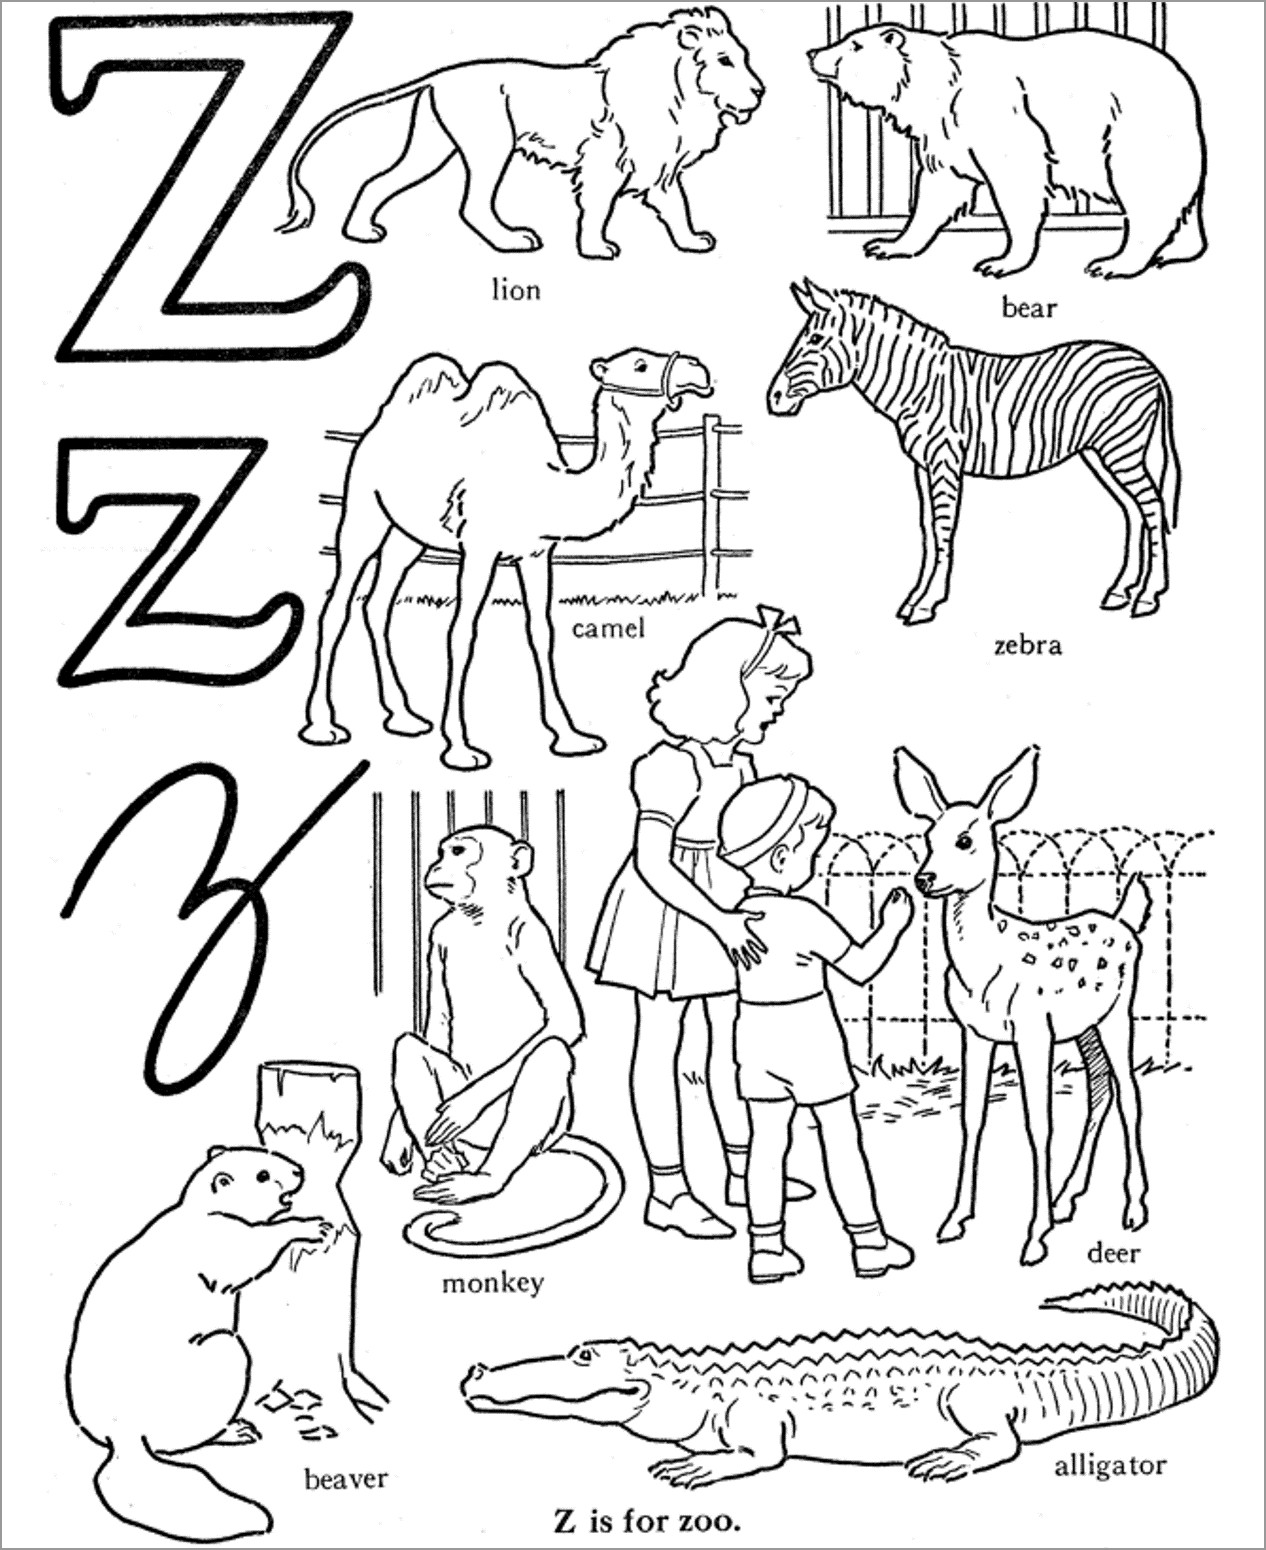 Z is for Zoo Coloring Page for Kids   ColoringBay